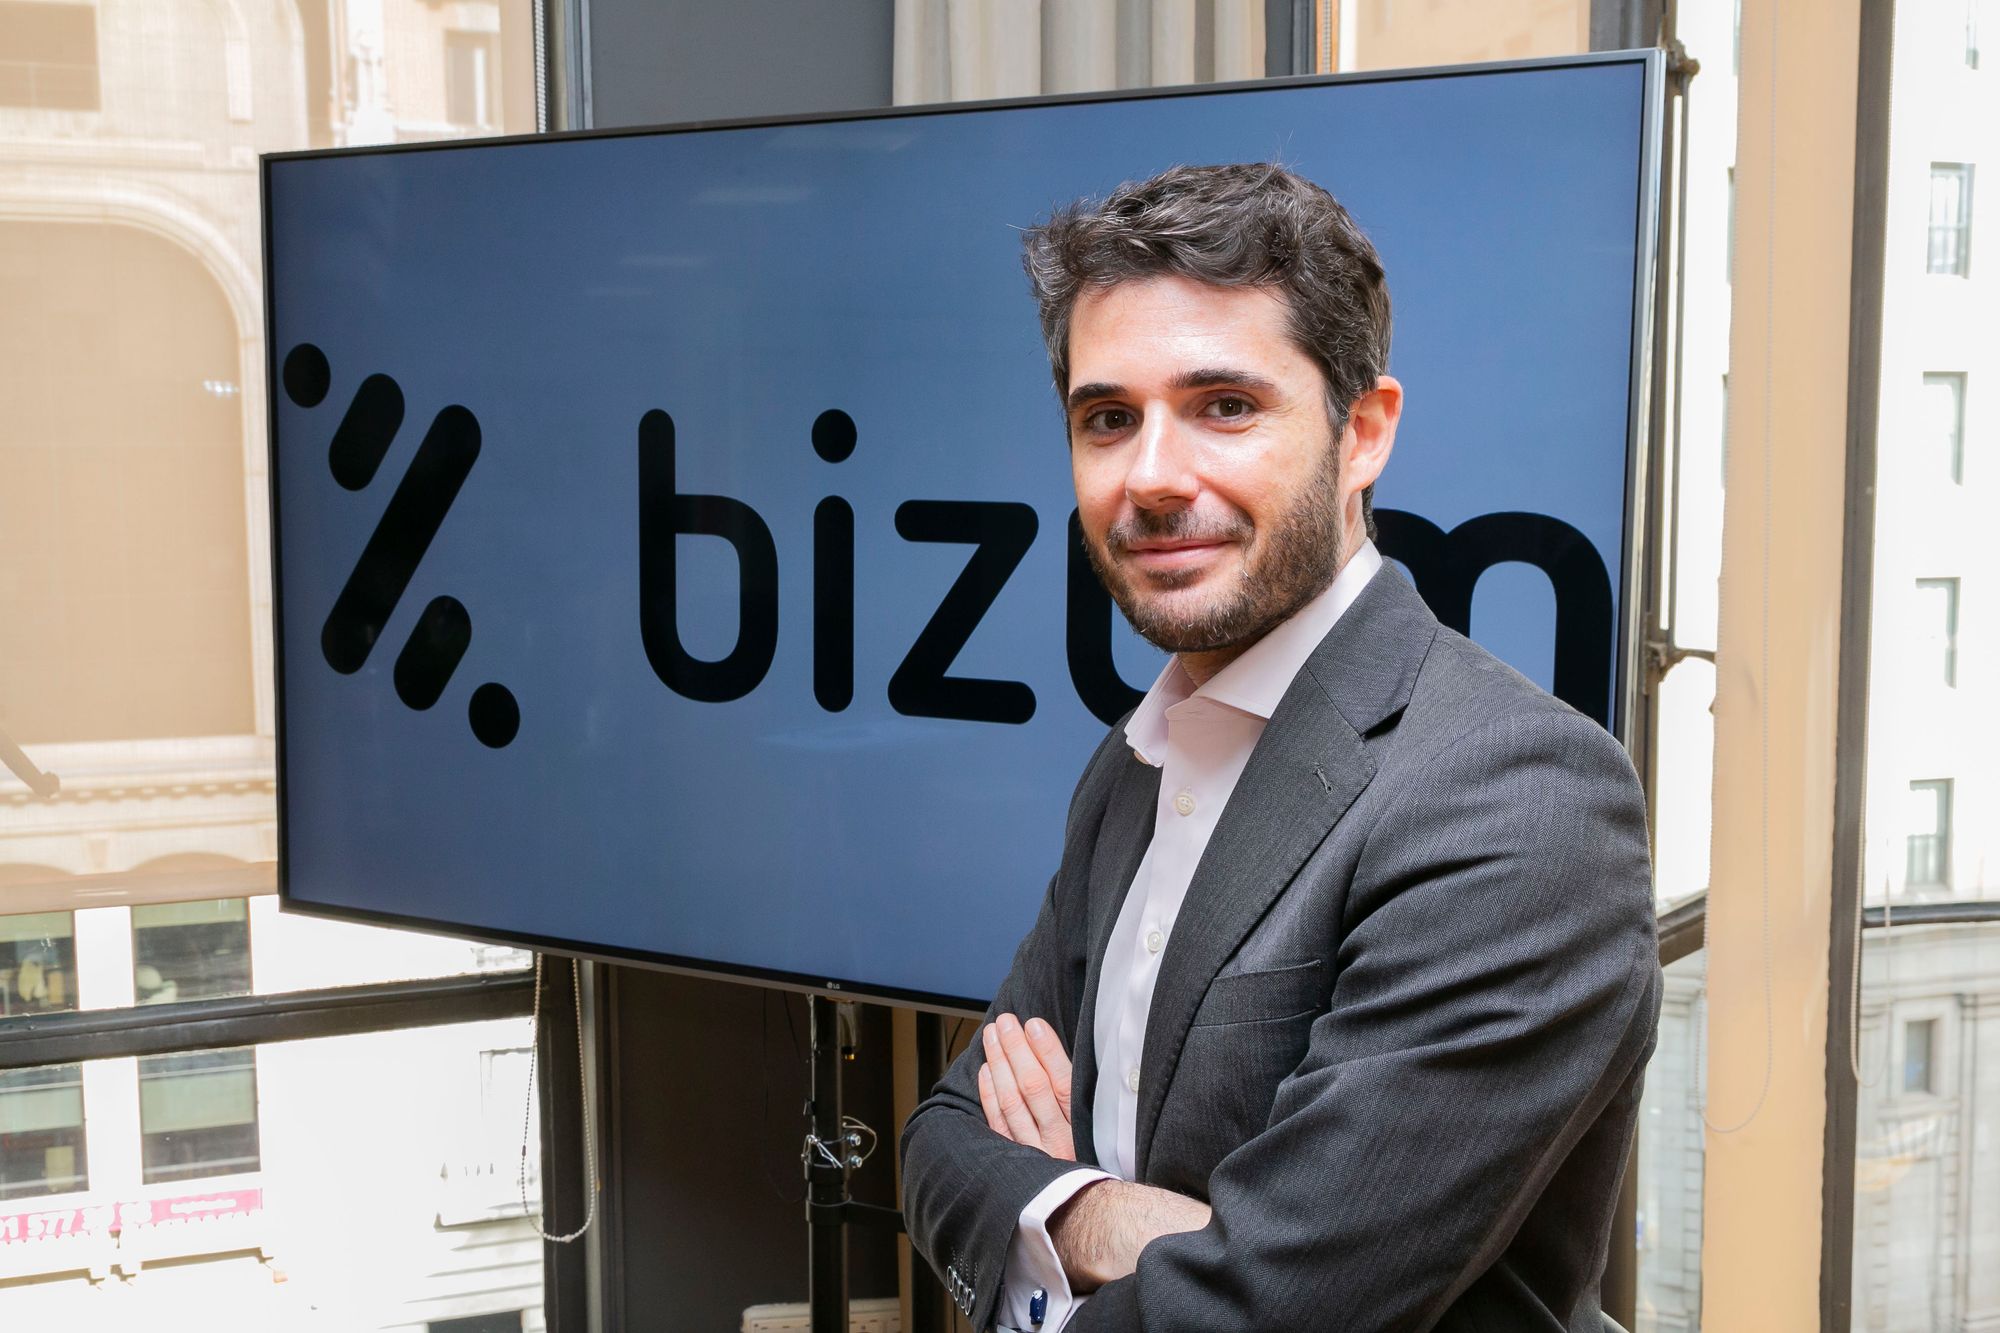 Bizum can be the European payment solution, will banks go for it?